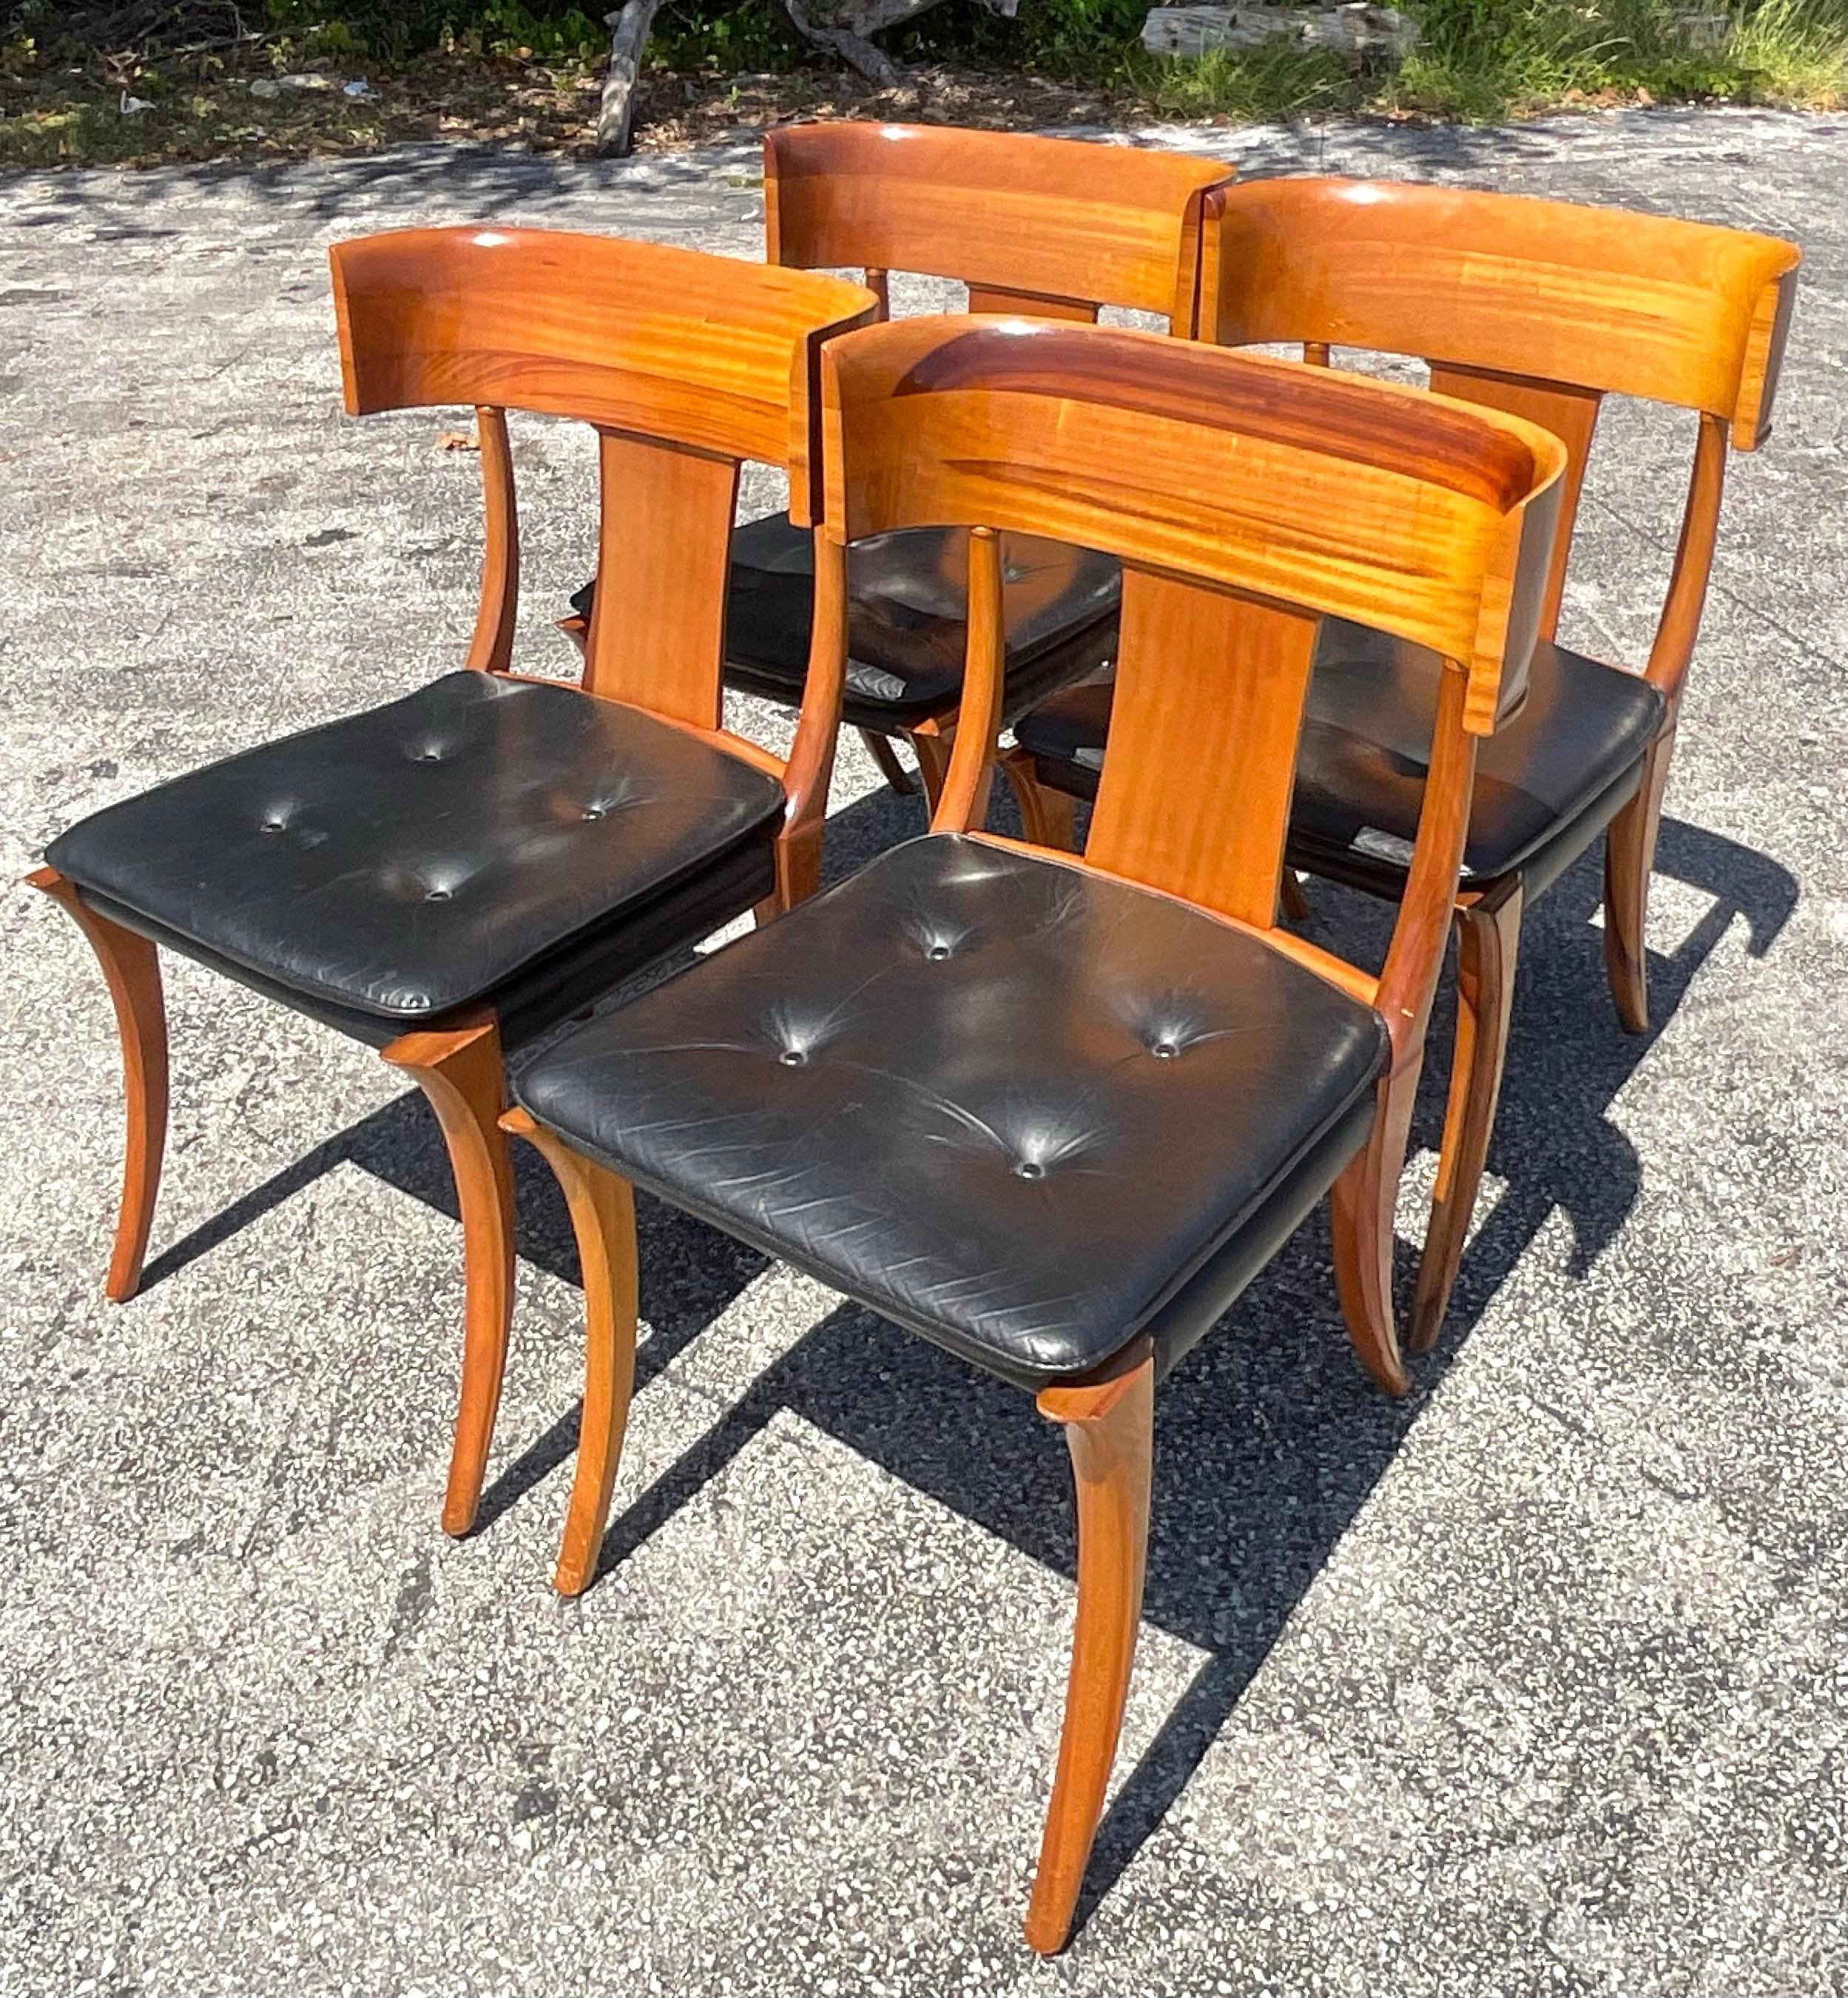 An extraordinary set of four vintage Boho dining chairs. The classic Klismos shape done in the manner of Kipp Stuart. Brilliant wood grain detail and a beautiful patina from time to time tufted black leather seats and saber legs. Acquired from a